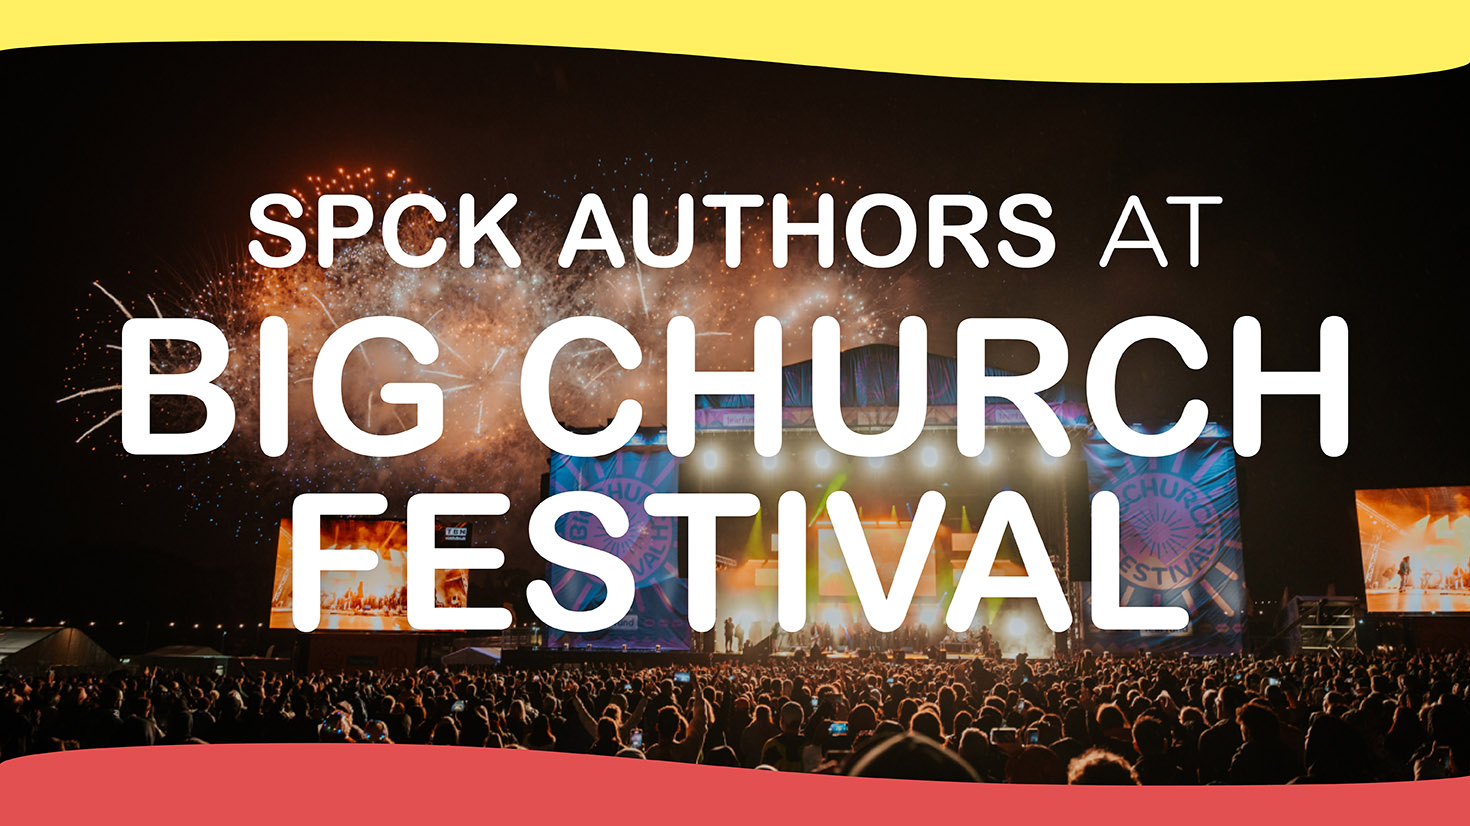 SPCK Authors at Big Church Festival: Storytelling and Crafting Tent!